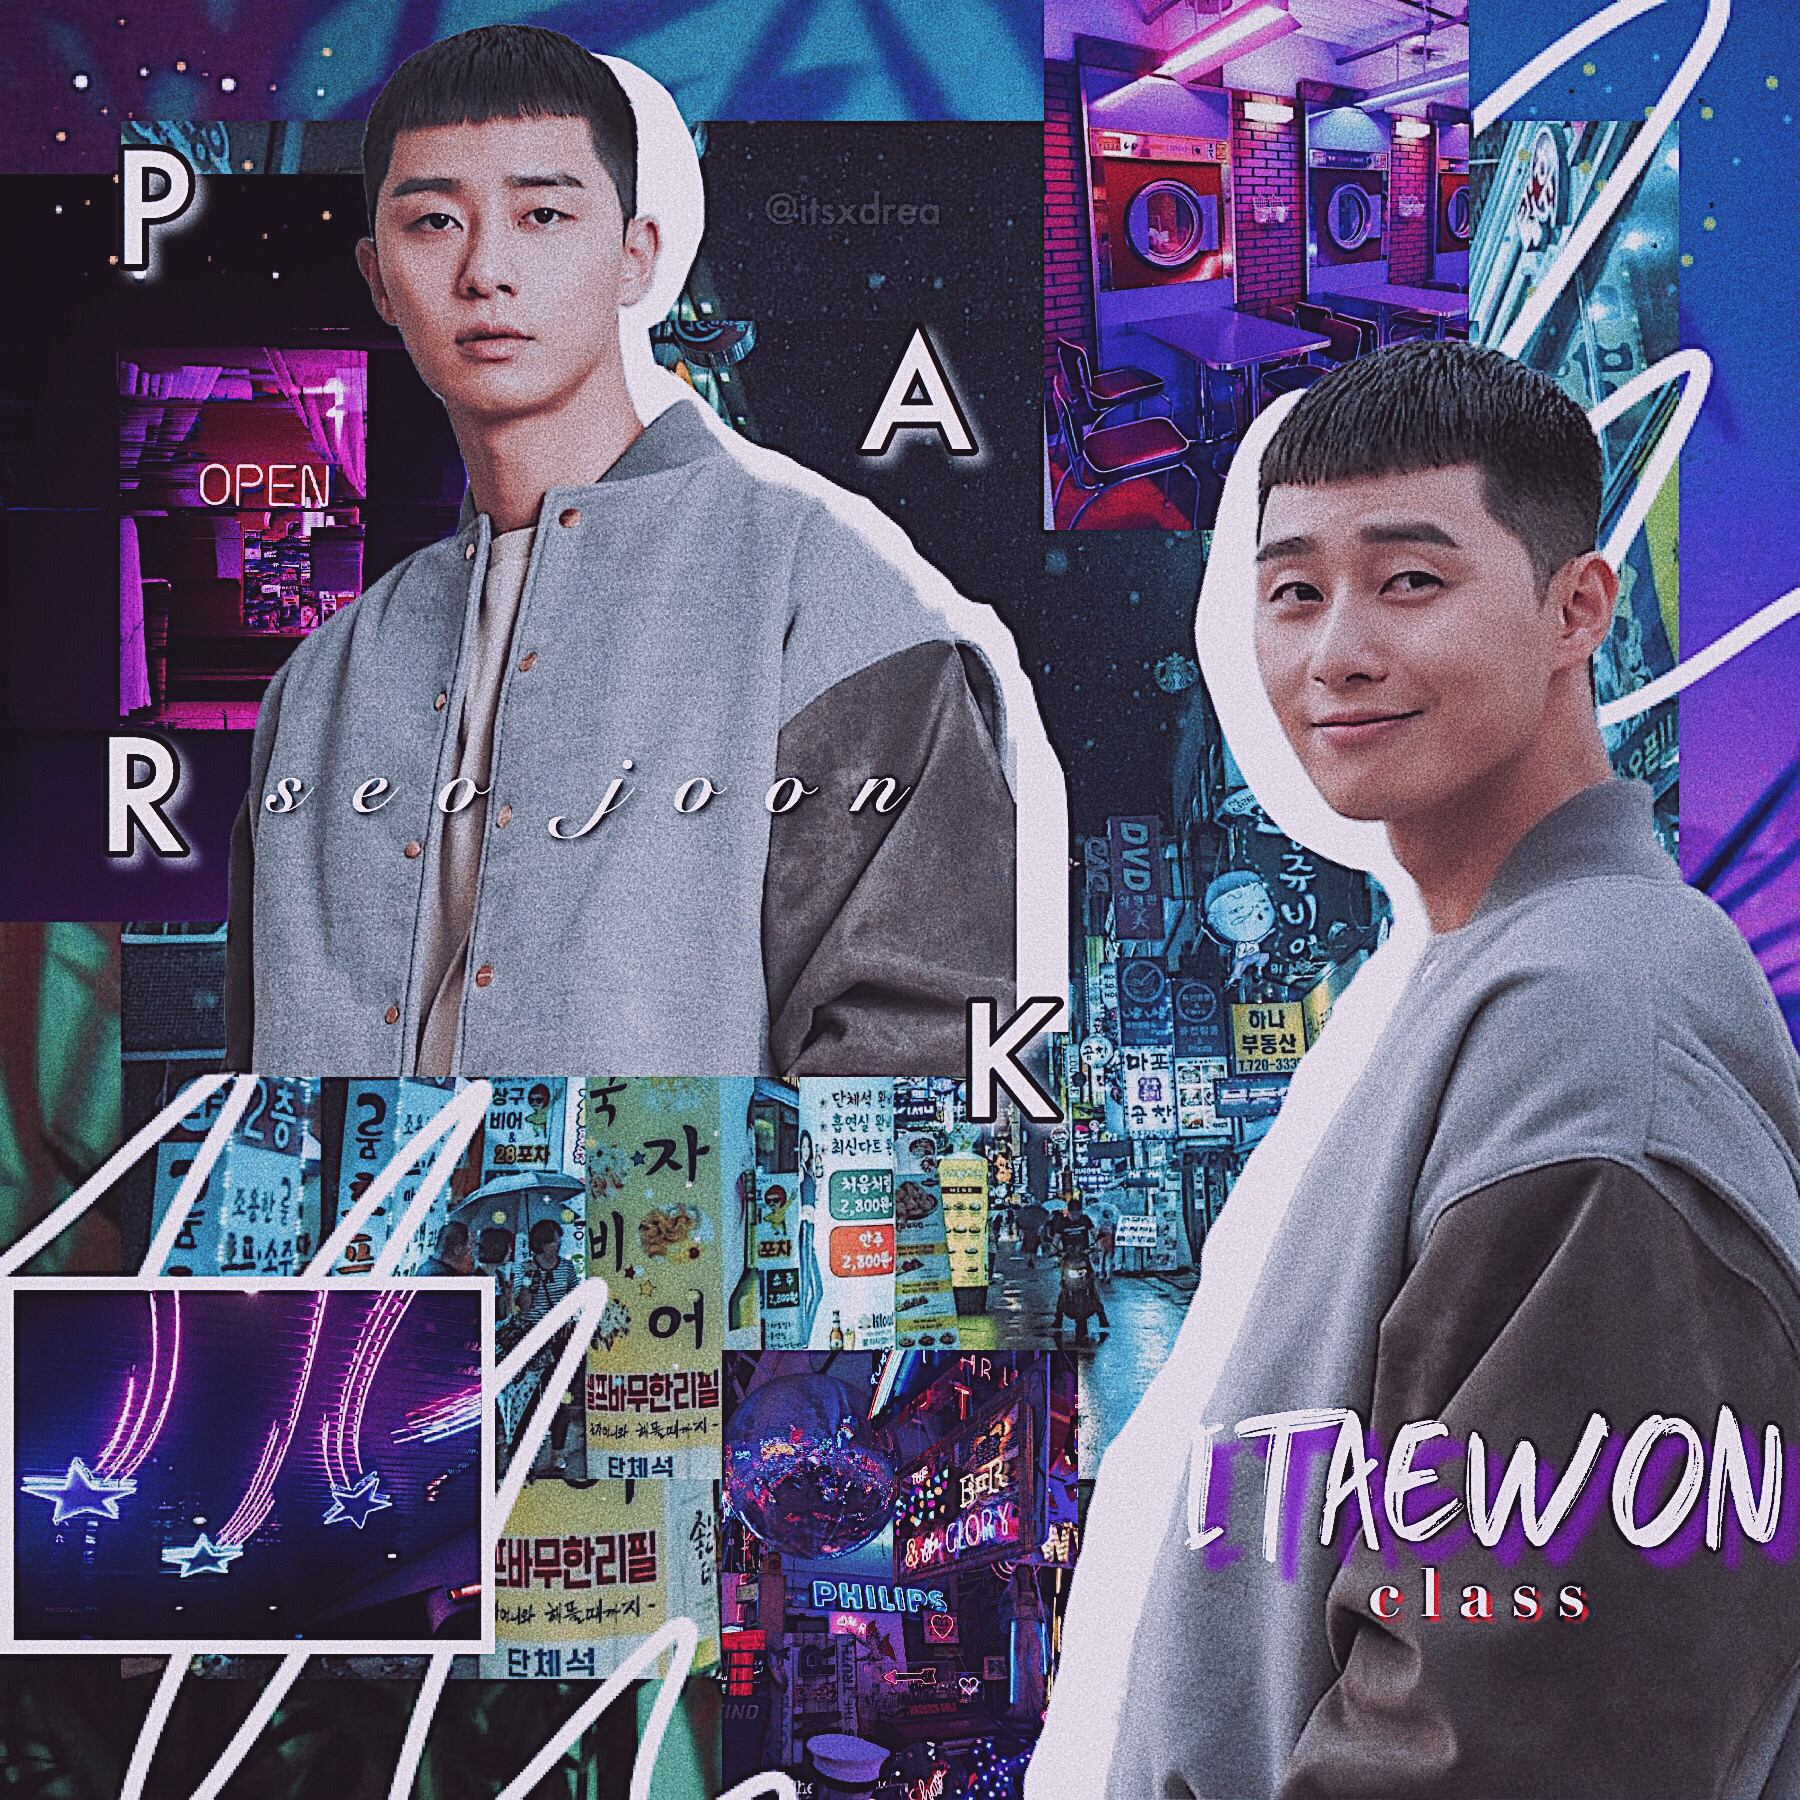 🍬
•park seo joon // actor •
| highly inspired by my queen, @MinGeniusYoongi <3 |
y’all this is good show 10/10. if you f r i e n d s h i p than this is the show for you. and ofc LOVE, bc i ain’t a kdrama w out it 